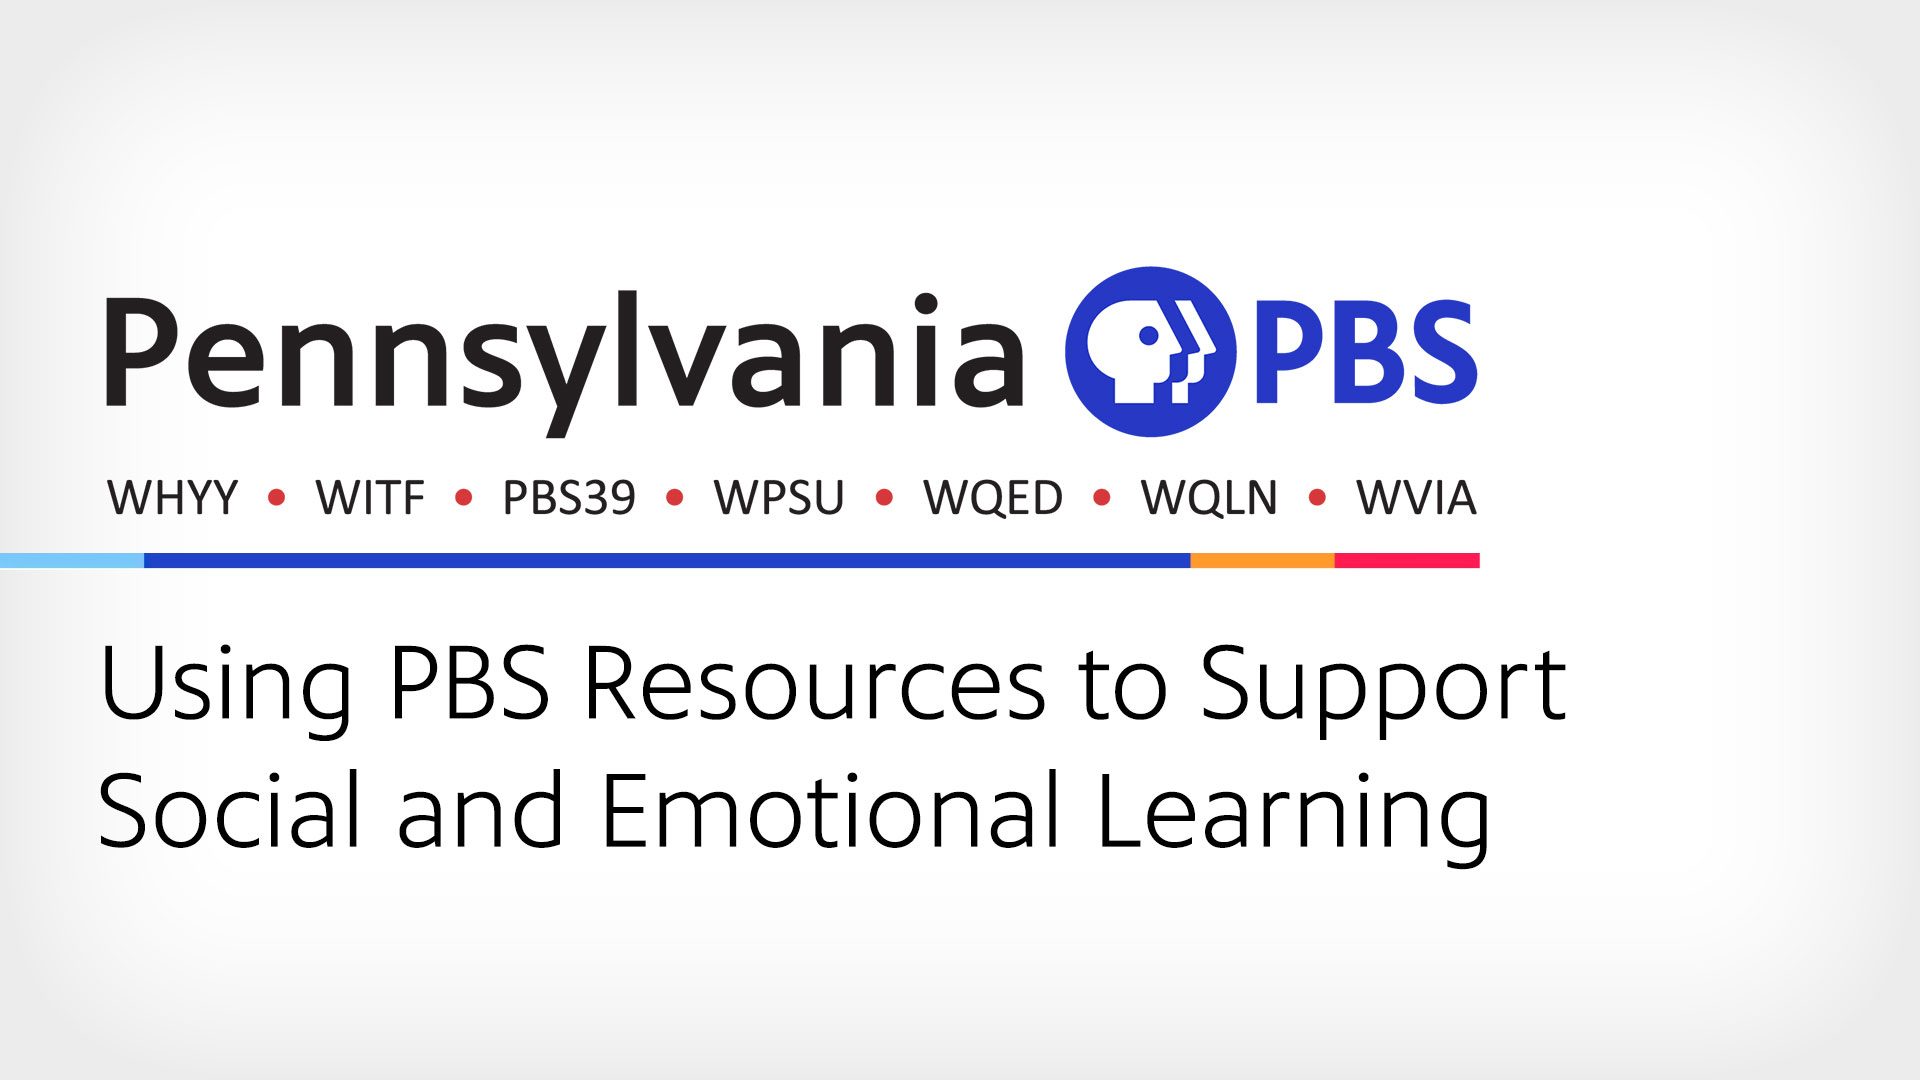 Using PBS Resources to Support Social and Emotional Learning